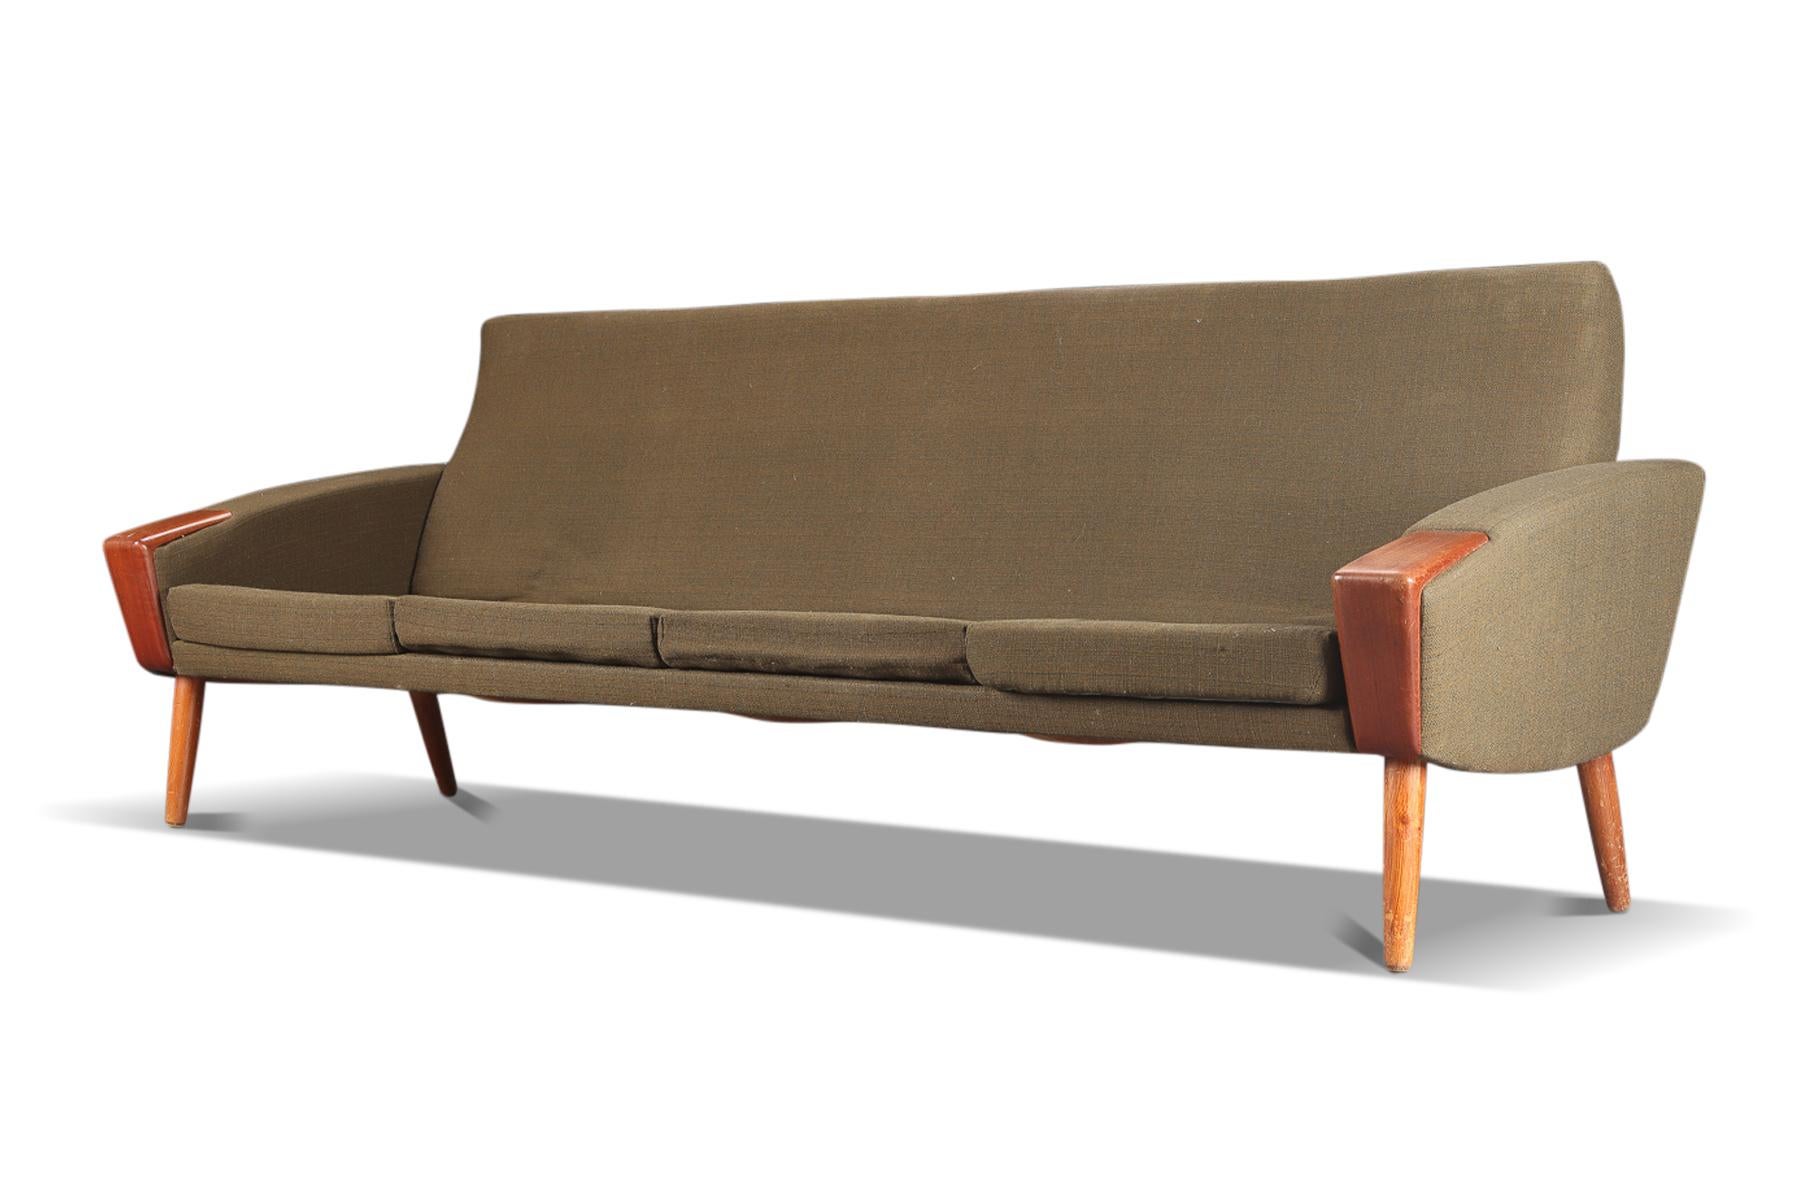 Other Atomic Four Seater Danish Sofa by Bramin